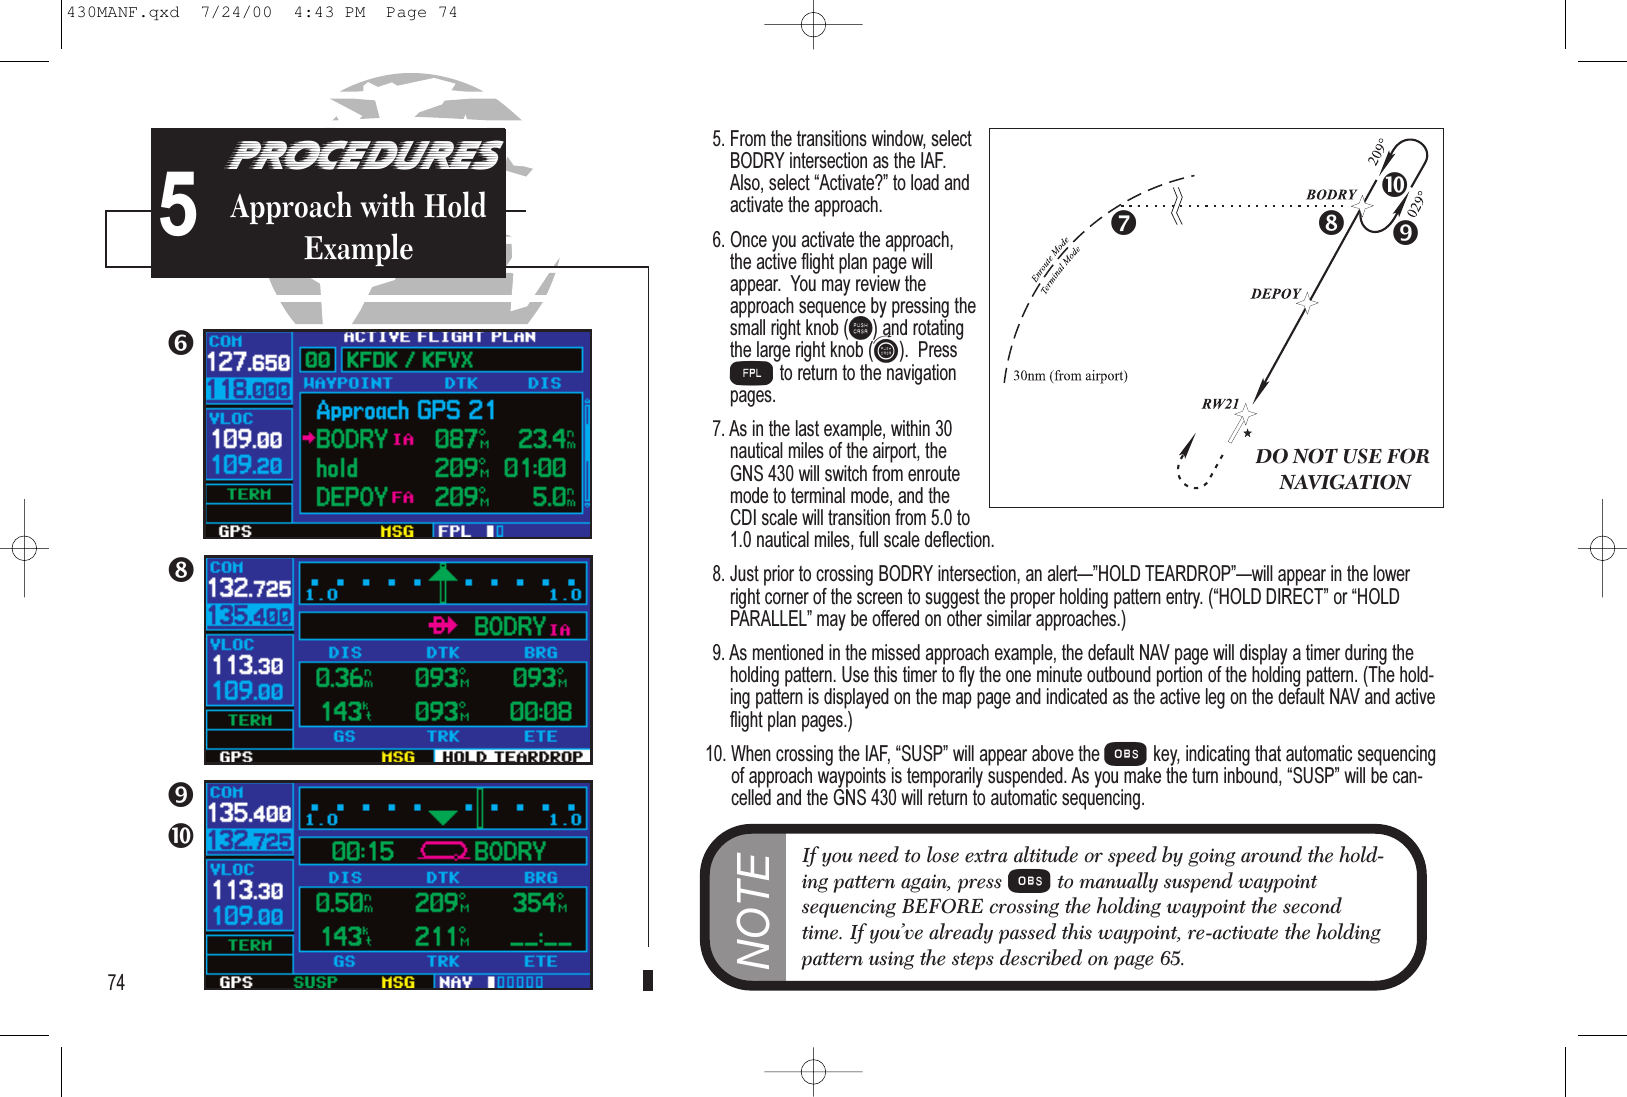 5. From the transitions window, selectBODRY intersection as the IAF.Also, select Activate? to load andactivate the approach.6. Once you activate the approach,the active flight plan page willappear.  You may review theapproach sequence by pressing thesmall right knob (r) and rotatingthe large right knob (d).  PressFto return to the navigationpages.7. As in the last example, within 30nautical miles of the airport, theGNS 430 will switch from enroutemode to terminal mode, and theCDI scale will transition from 5.0 to1.0 nautical miles, full scale deflection.8. Just prior to crossing BODRY intersection, an alertHOLD TEARDROPwill appear in the lowerright corner of the screen to suggest the proper holding pattern entry. (HOLD DIRECT or HOLDPARALLEL may be offered on other similar approaches.)9. As mentioned in the missed approach example, the default NAV page will display a timer during theholding pattern. Use this timer to fly the one minute outbound portion of the holding pattern. (The hold-ing pattern is displayed on the map page and indicated as the active leg on the default NAV and activeflight plan pages.)10. When crossing the IAF, SUSP will appear above the Okey, indicating that automatic sequencingof approach waypoints is temporarily suspended. As you make the turn inbound, SUSP will be can-celled and the GNS 430 will return to automatic sequencing.PROCEDURESApproach Examples574PROCEDURESApproach with HoldExampleNOTEIf you need to lose extra altitude or speed by going around the hold-ing pattern again, press Oto manually suspend waypointsequencing BEFORE crossing the holding waypoint the secondtime. If you’ve already passed this waypoint, re-activate the holdingpattern using the steps described on page 65.DO NOT USE FORNAVIGATION5430MANF.qxd  7/24/00  4:43 PM  Page 74